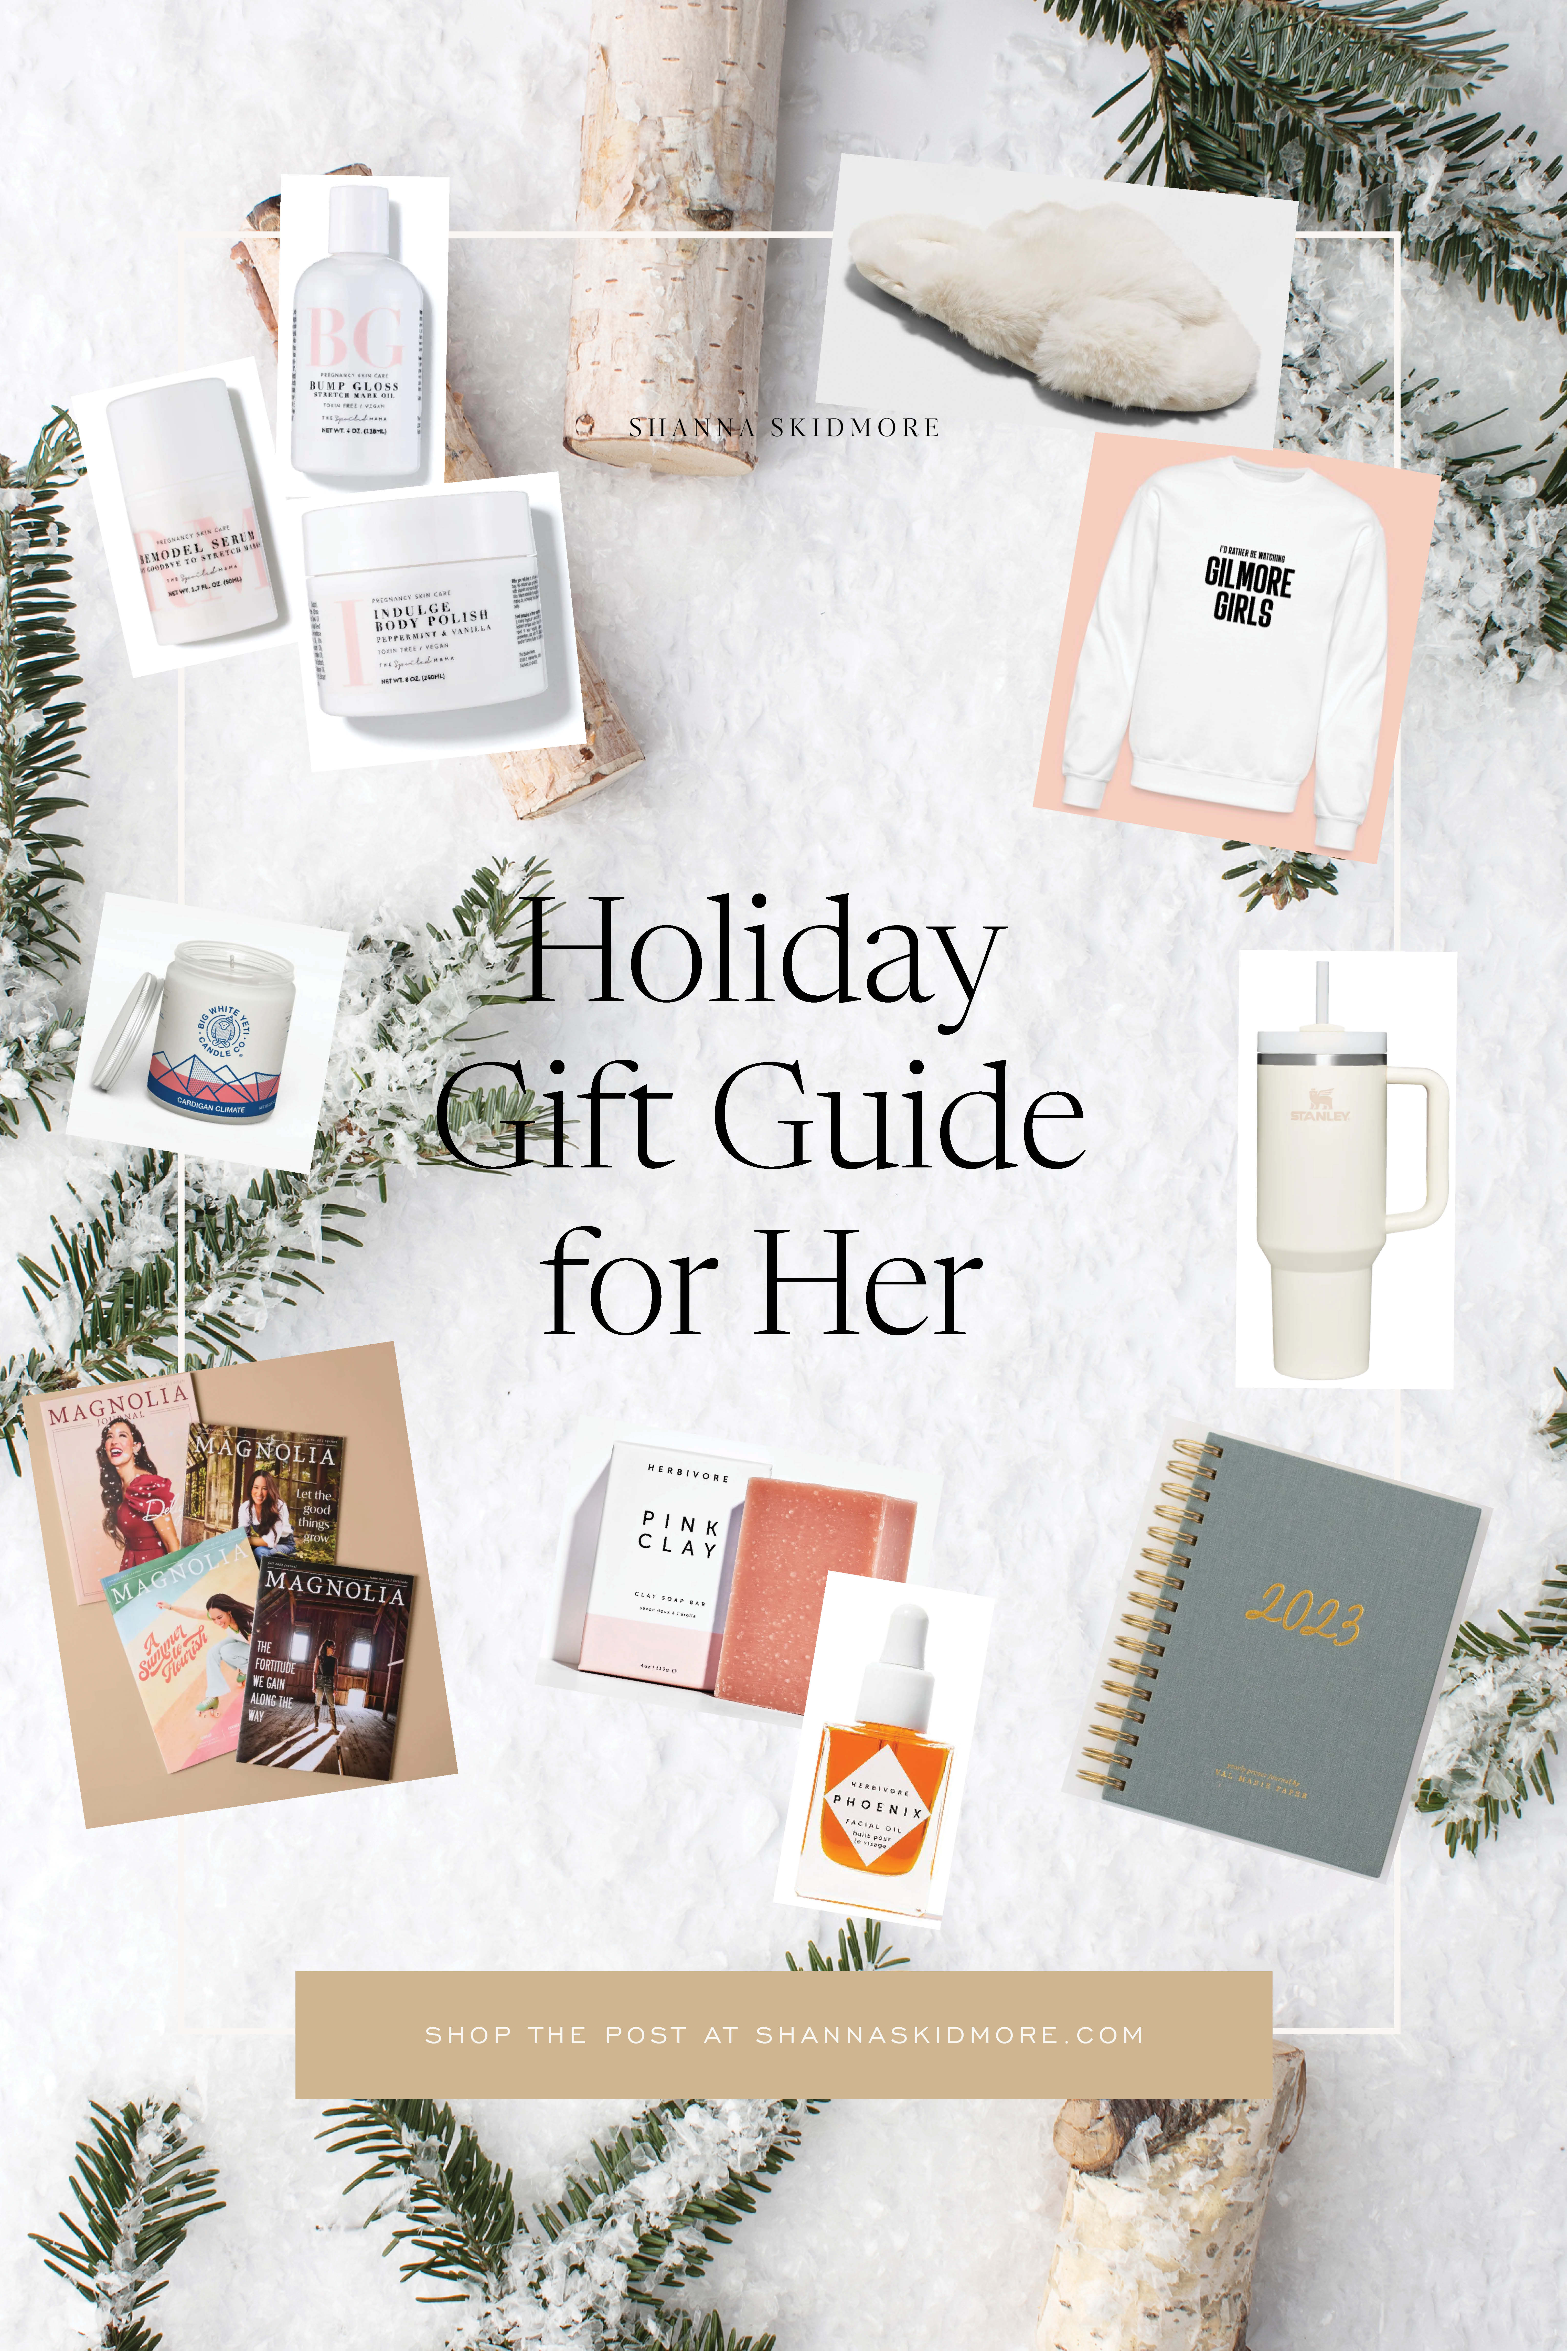 My favorite $10 gifts ideas - The Busy Budgeter